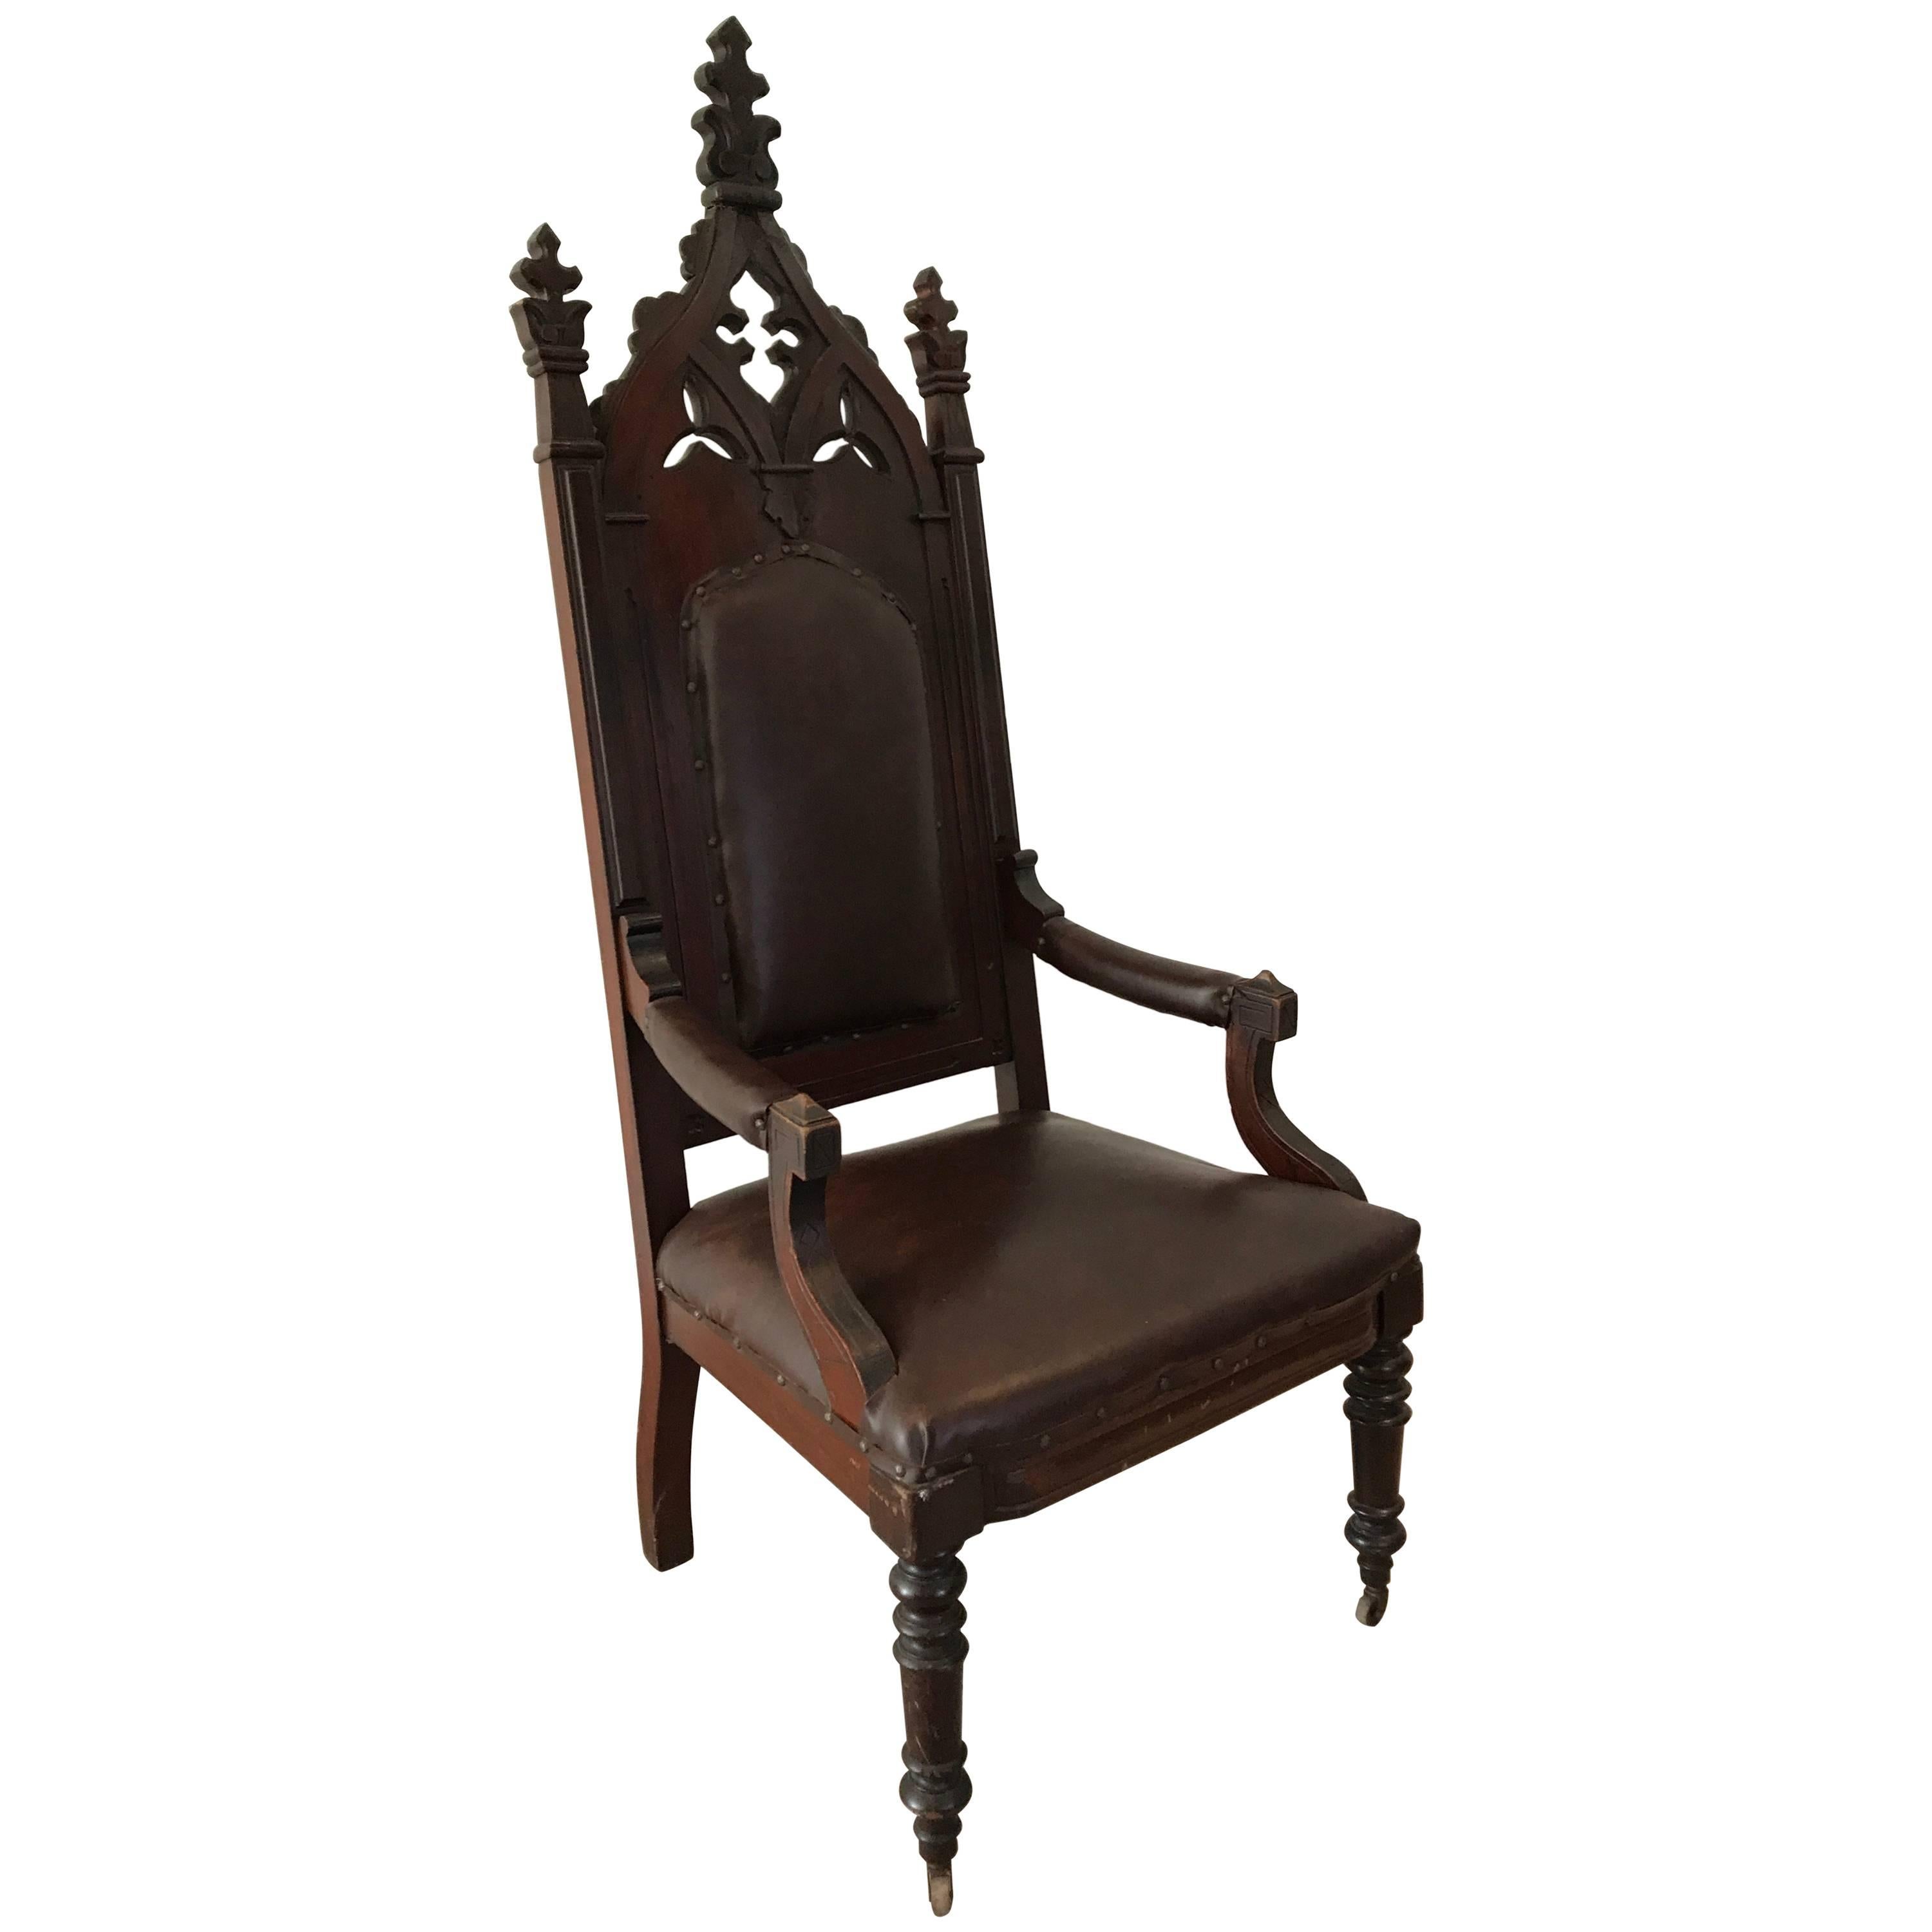 19th Century English Gothic Revival Armchair